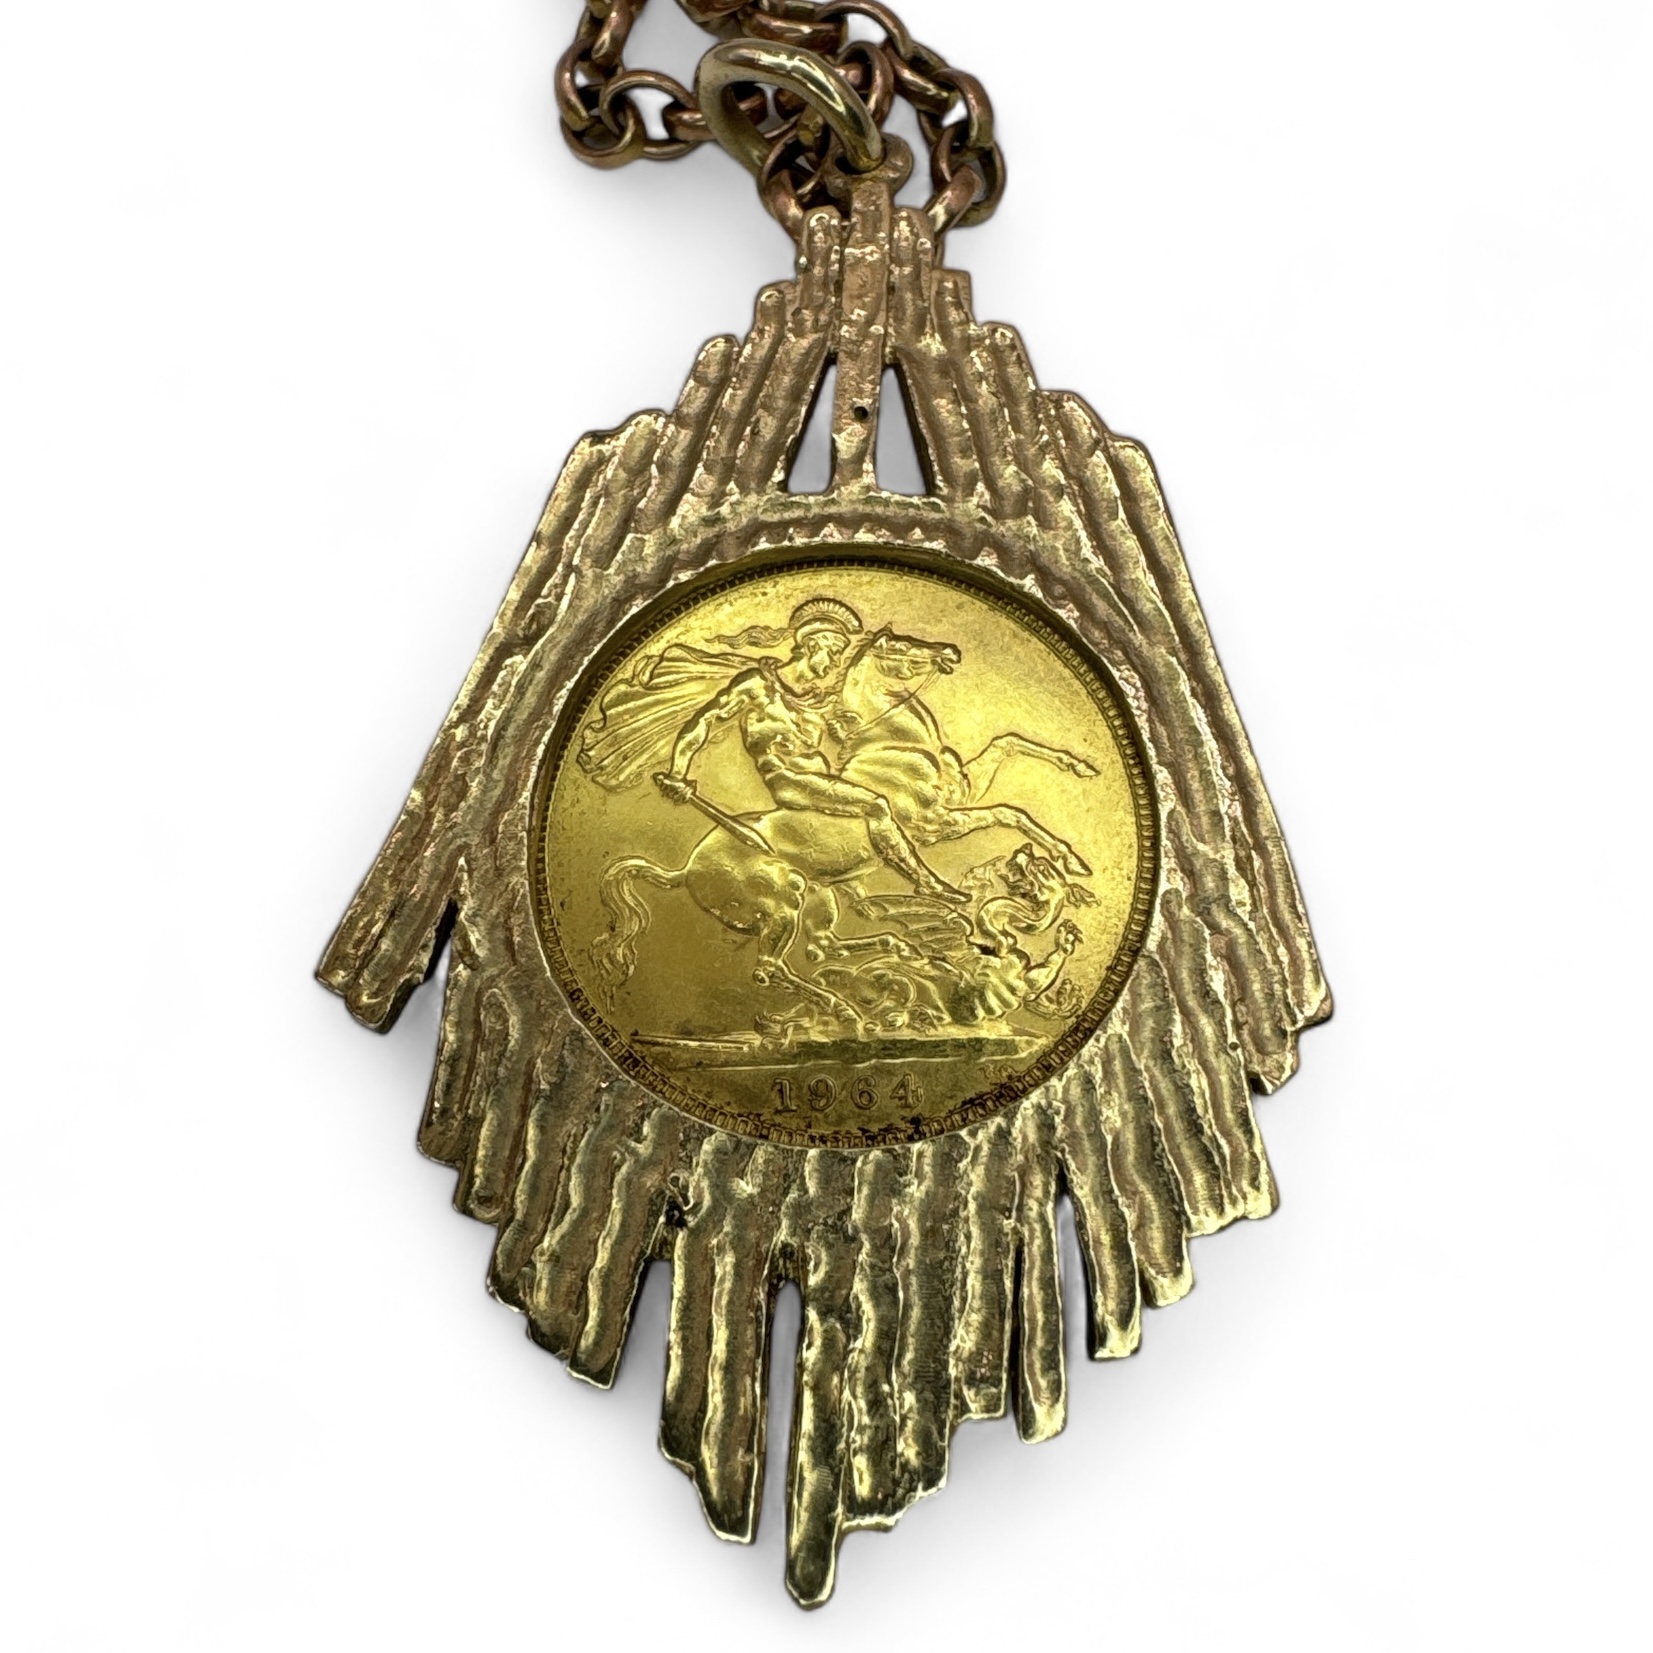 An Elizabeth II gold full Sovereign coin dated 1964 in a bark effect 9ct pendant mount on a gift - Image 2 of 2